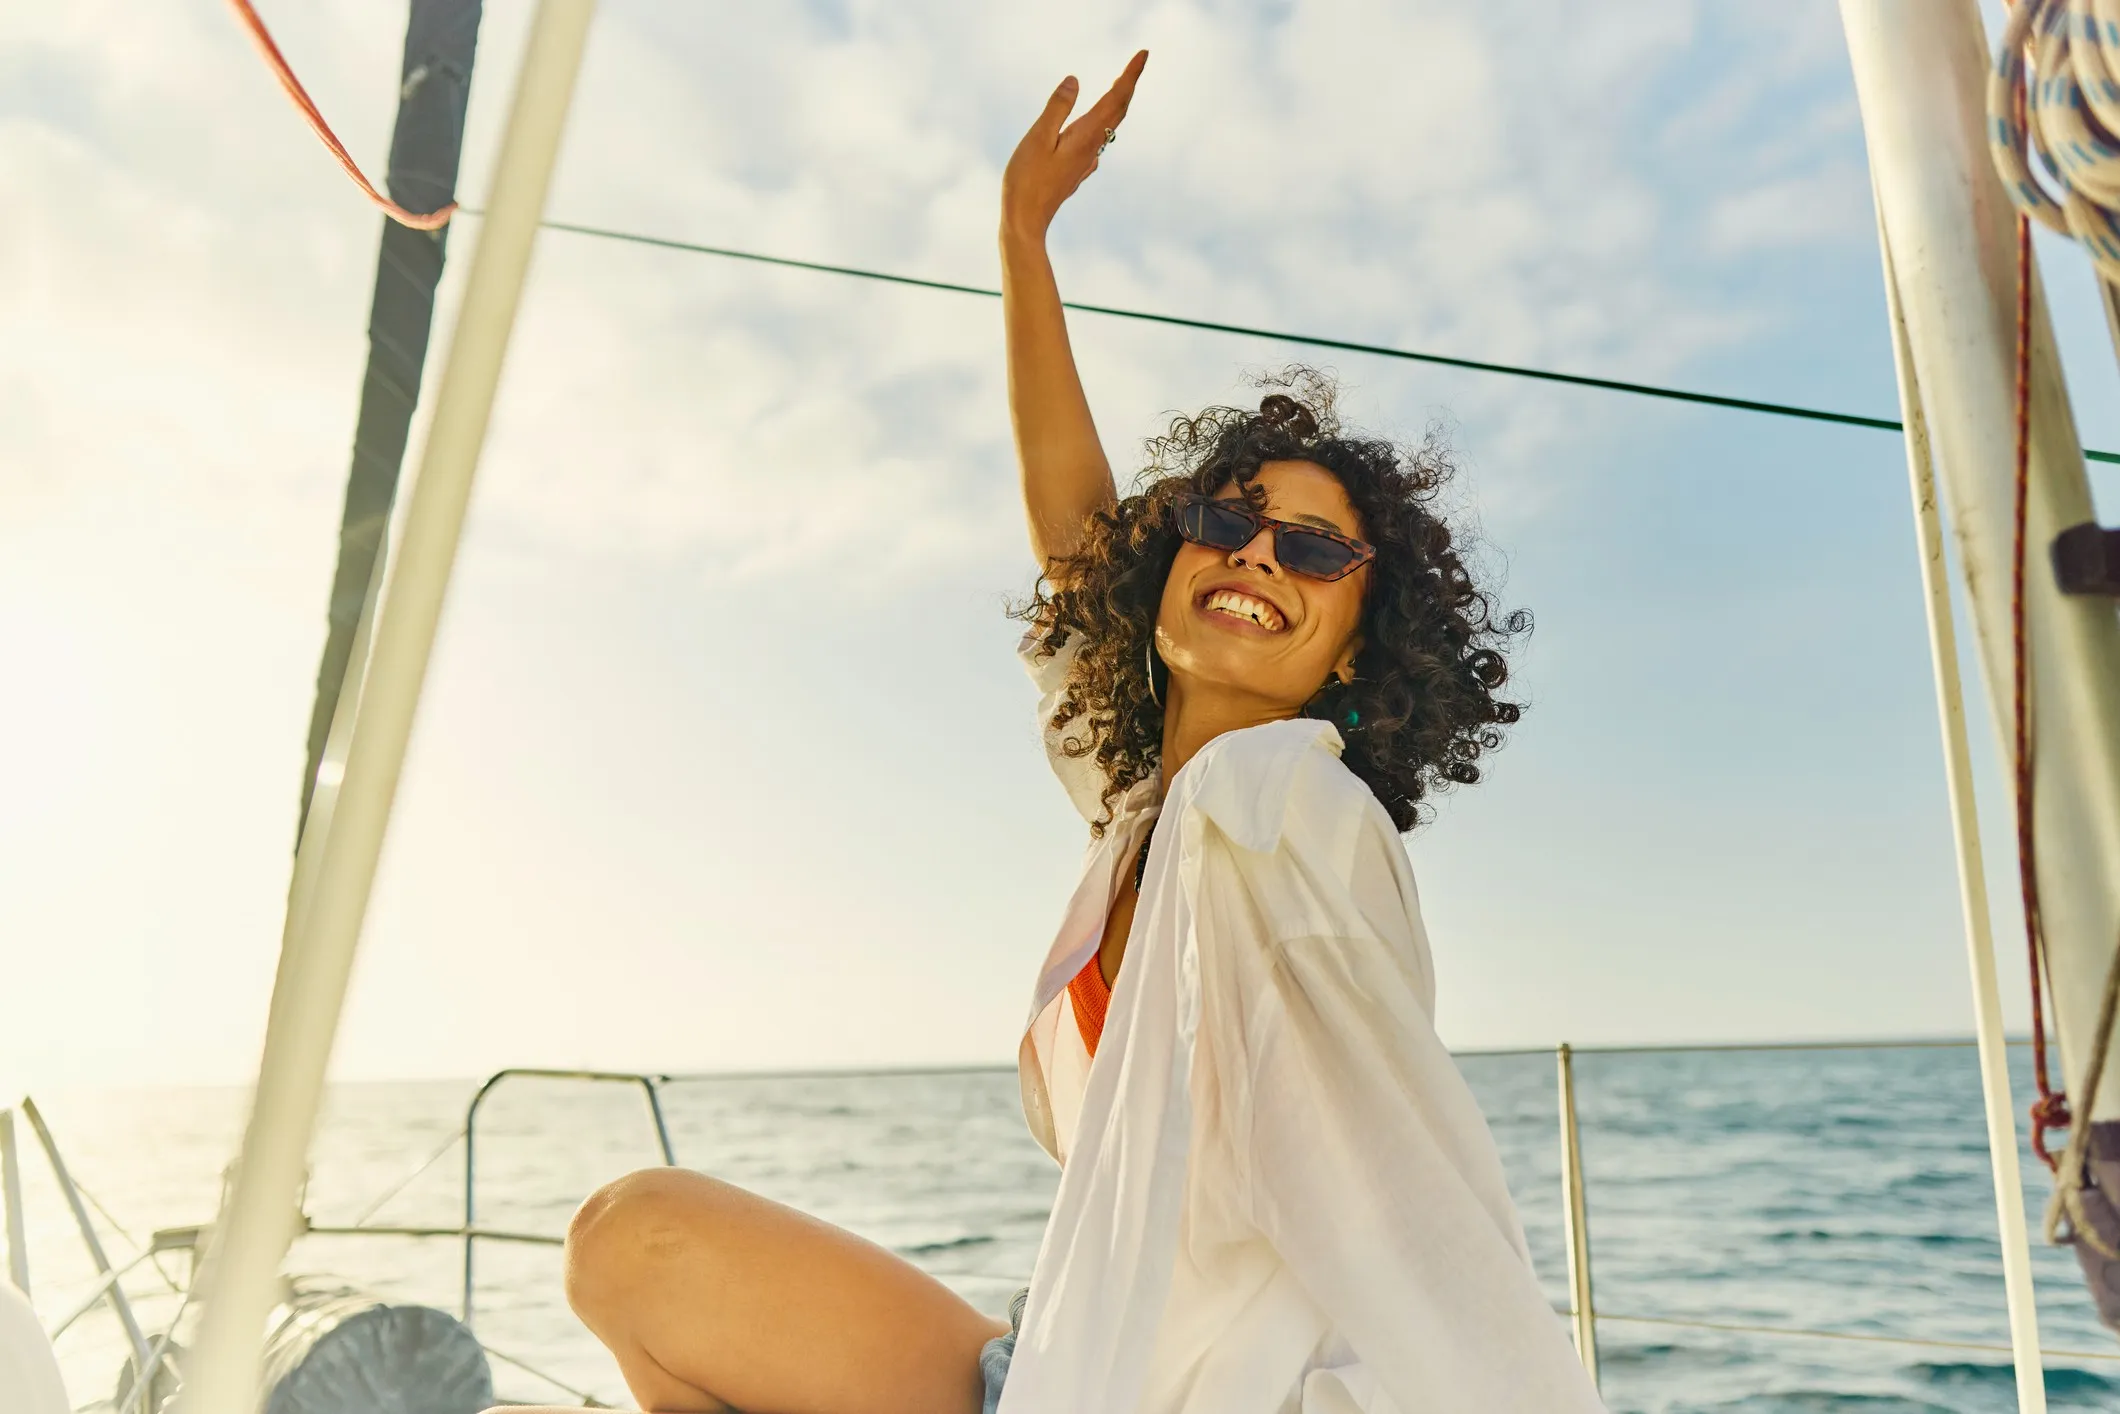 Woman enjoys getting away from it all and sailing out on the open ocean towards the setting sun